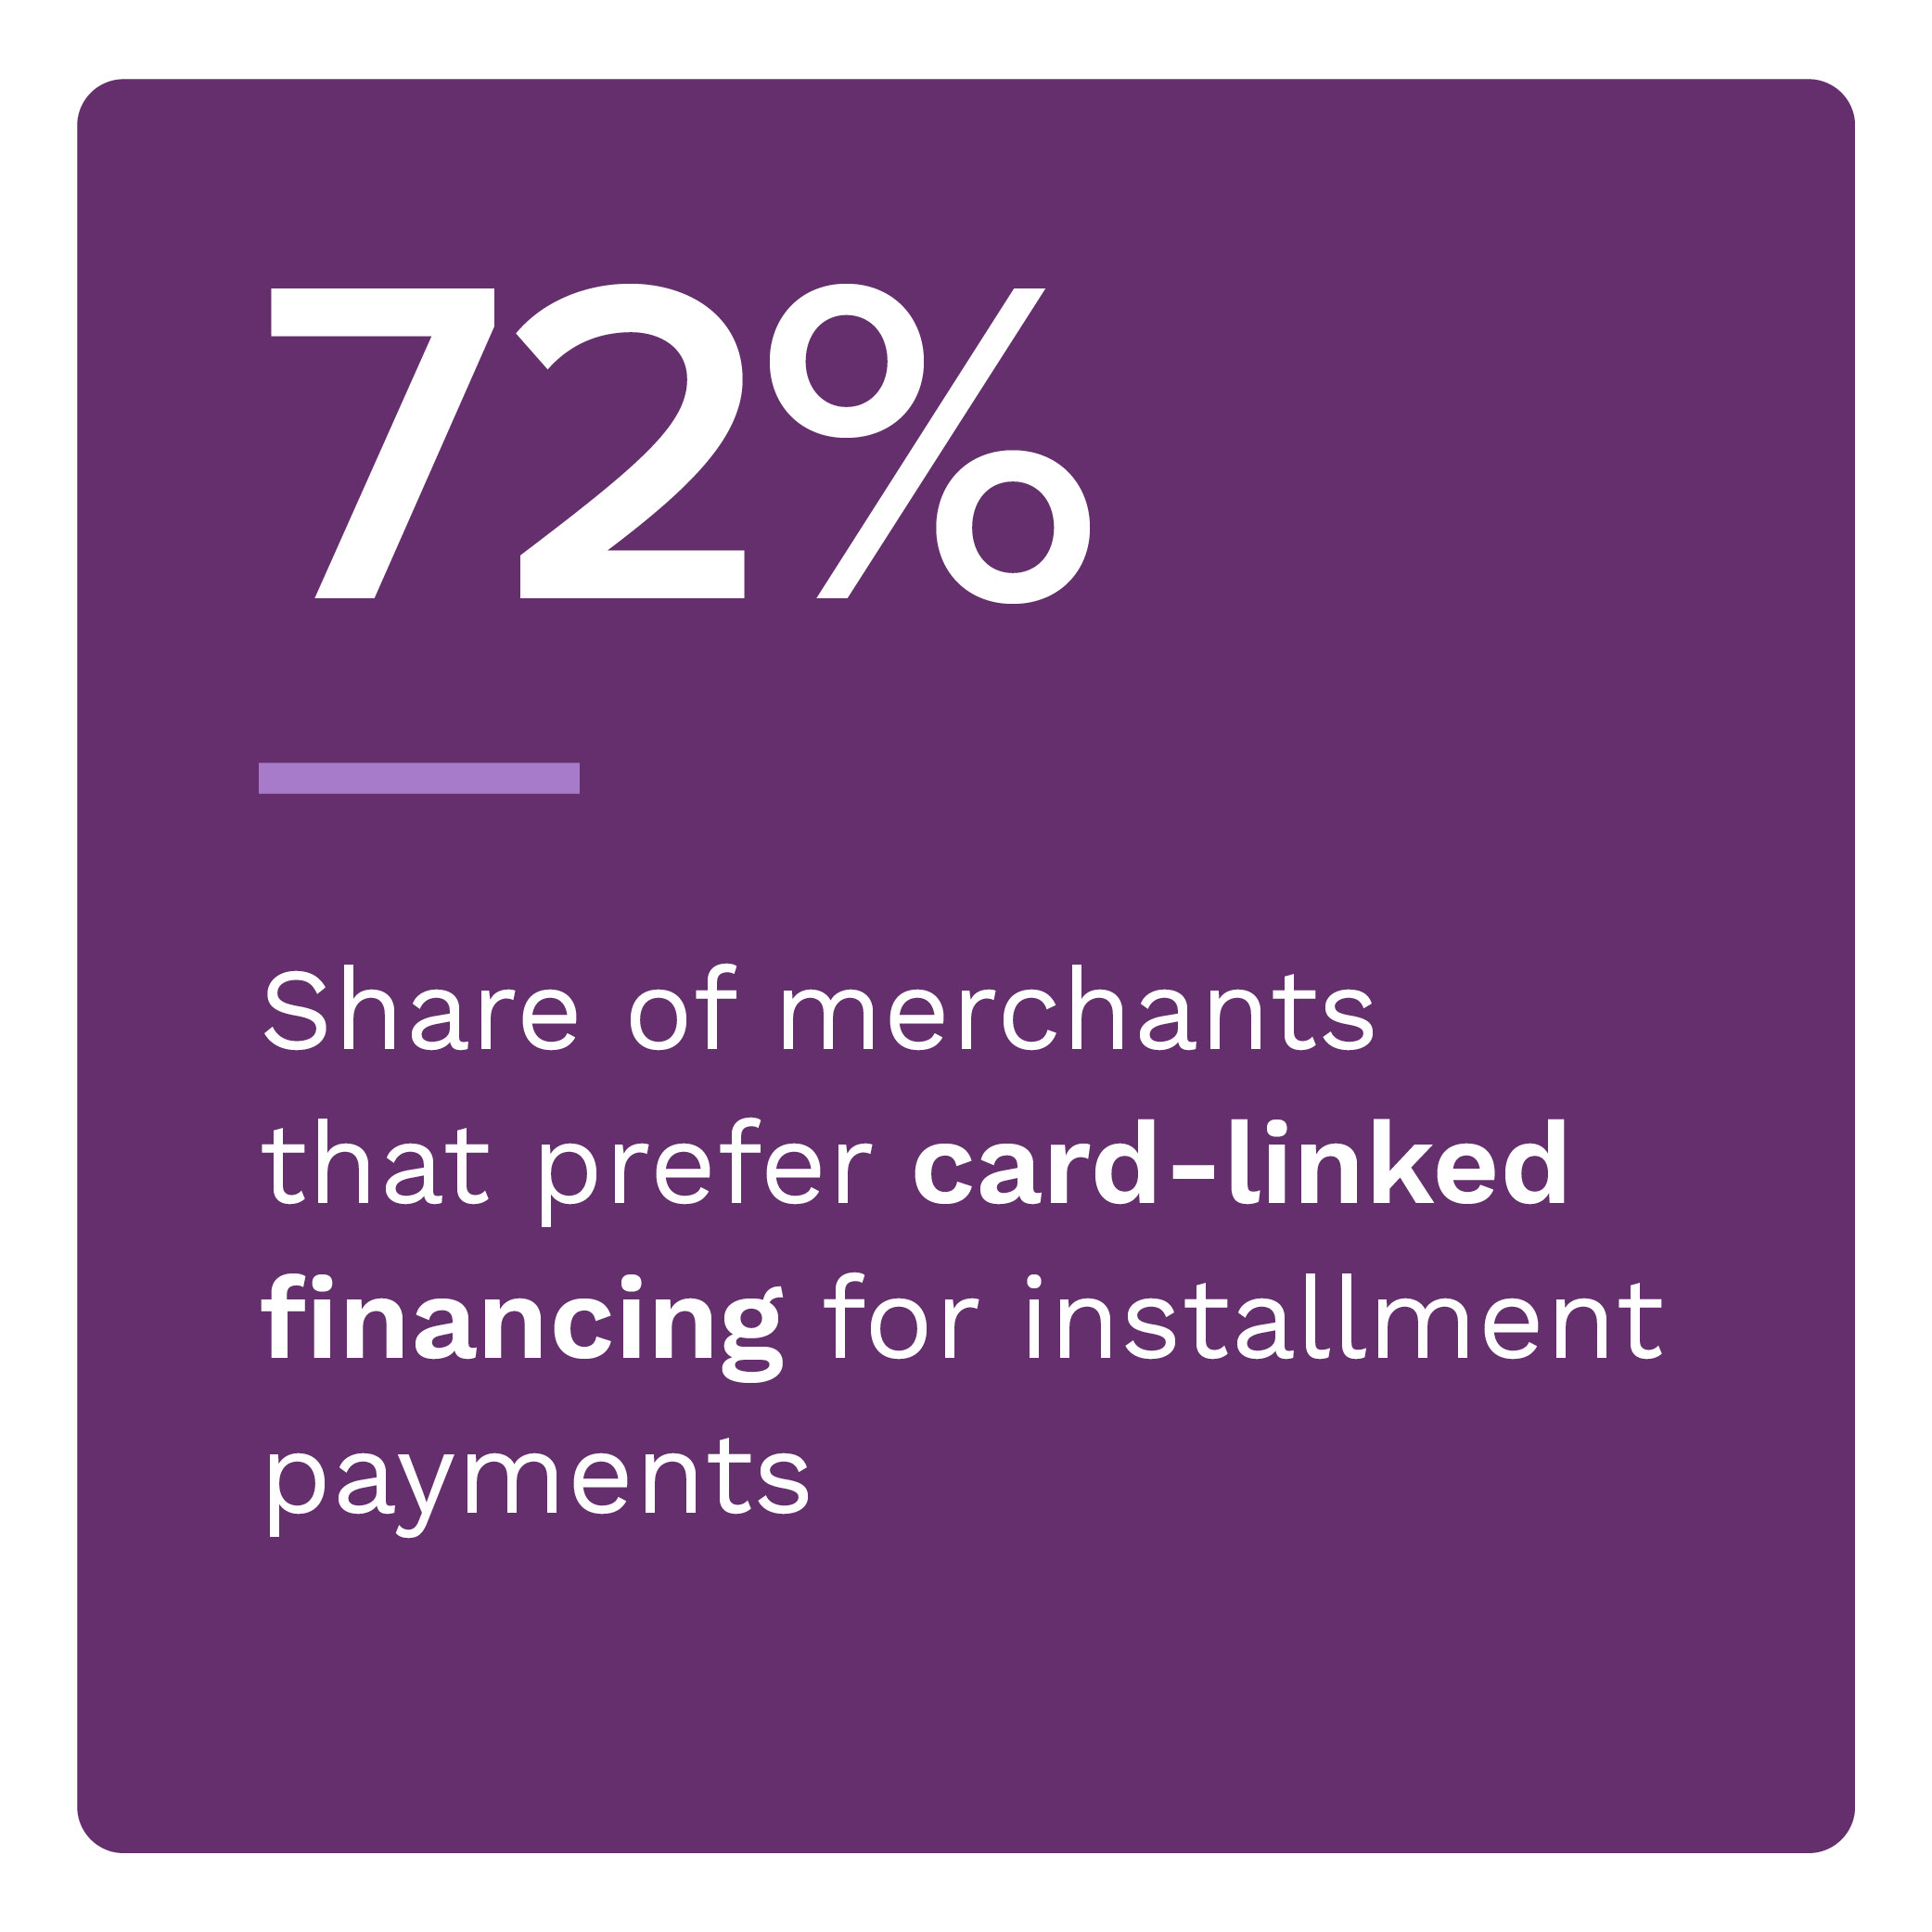 72%: Share of merchants that prefer card-linked financing for installment payments